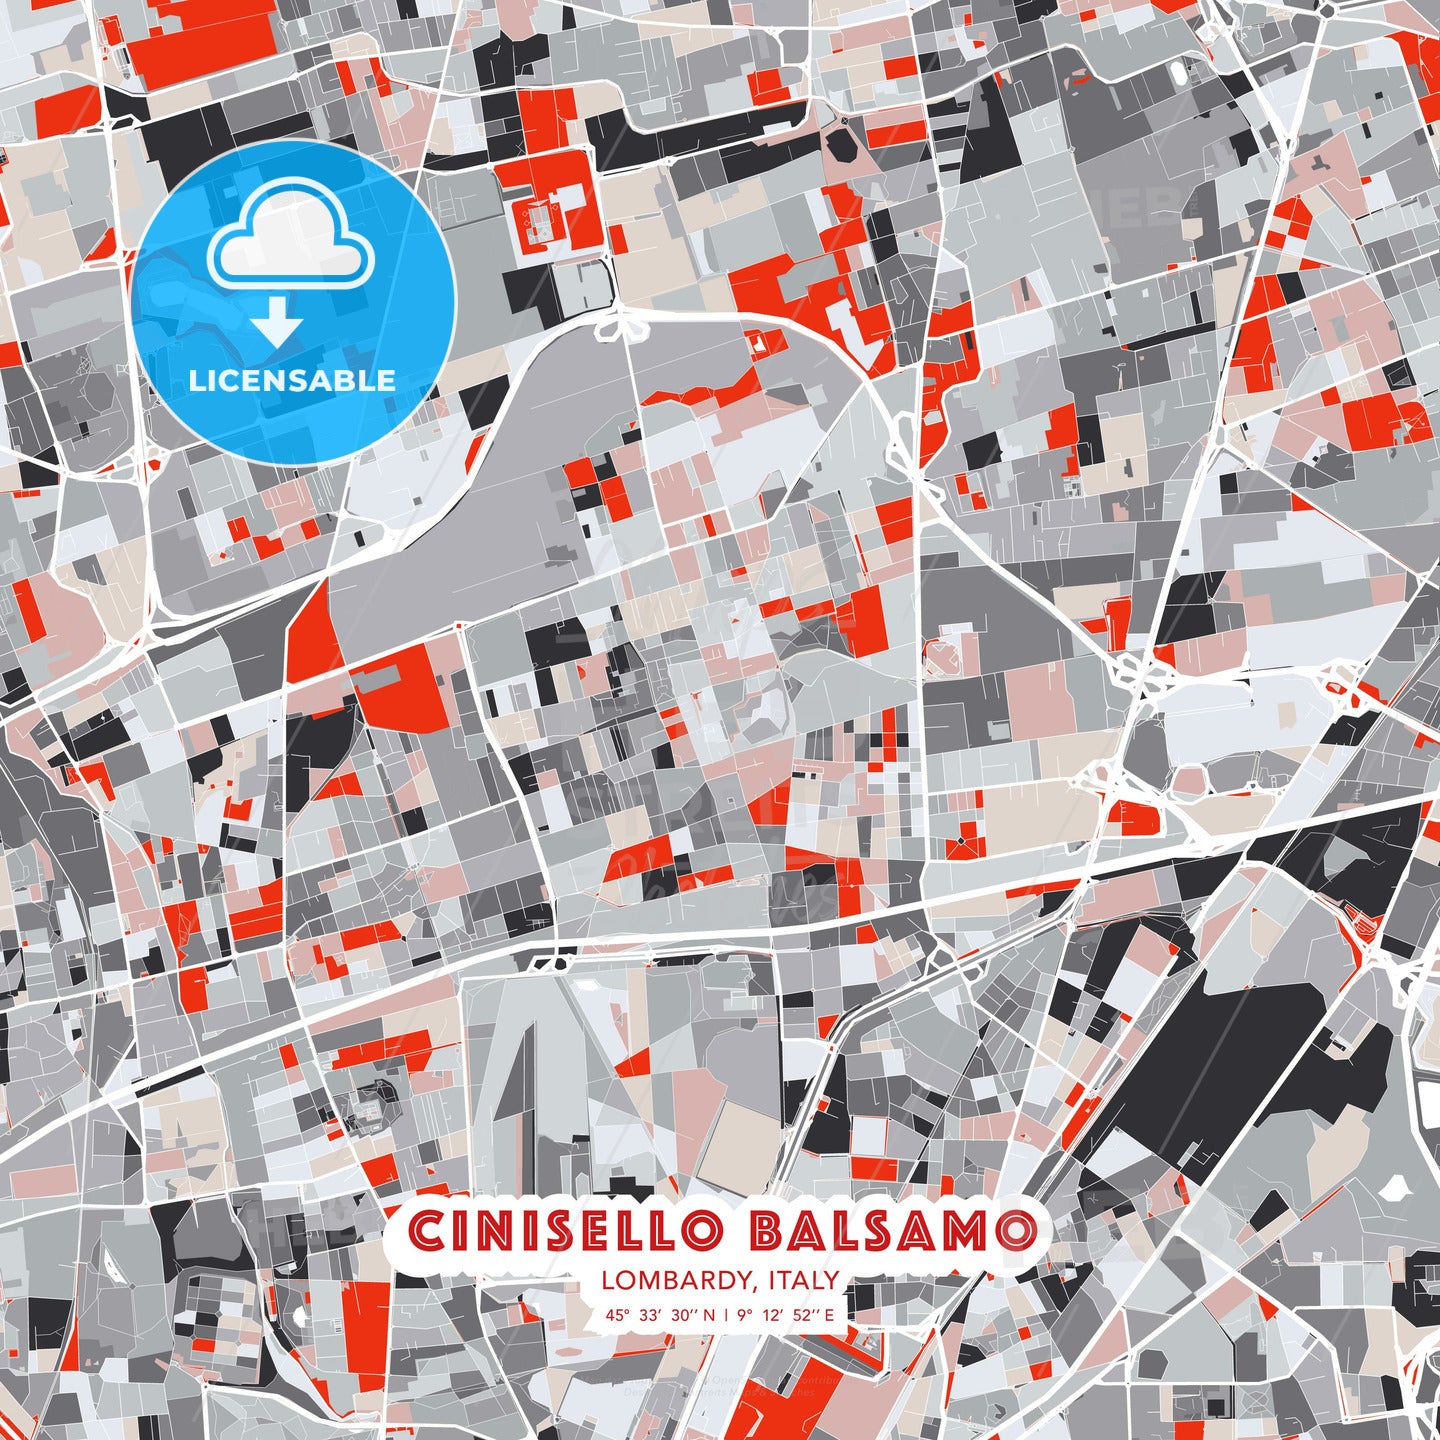 Cinisello Balsamo, Lombardy, Italy, modern map - HEBSTREITS Sketches